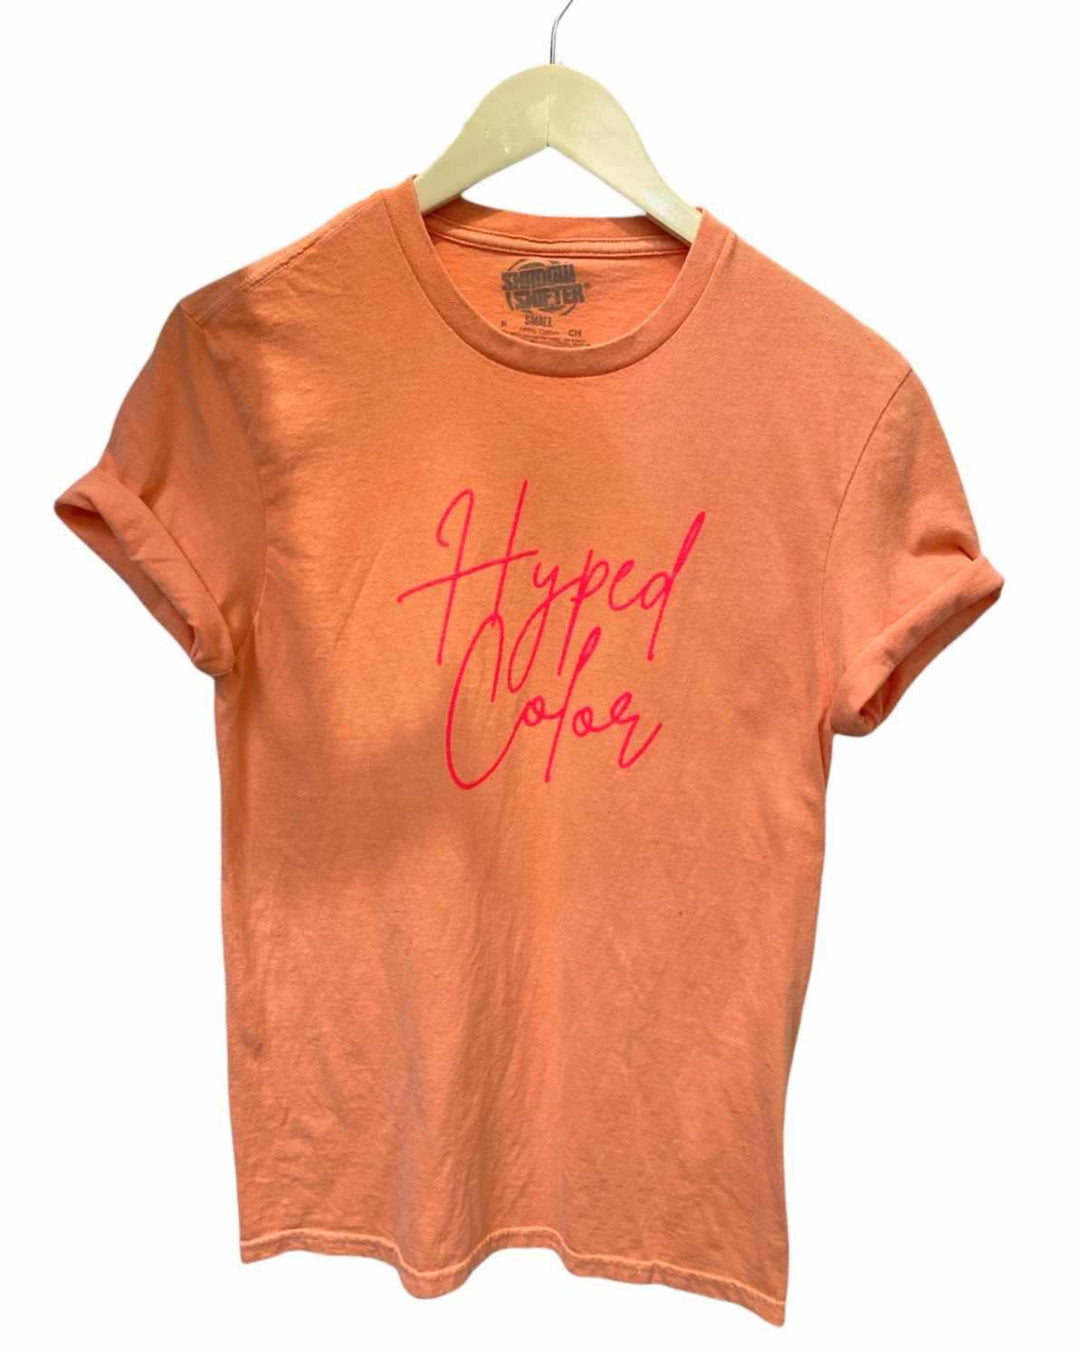 Orange Hyped Color Tee